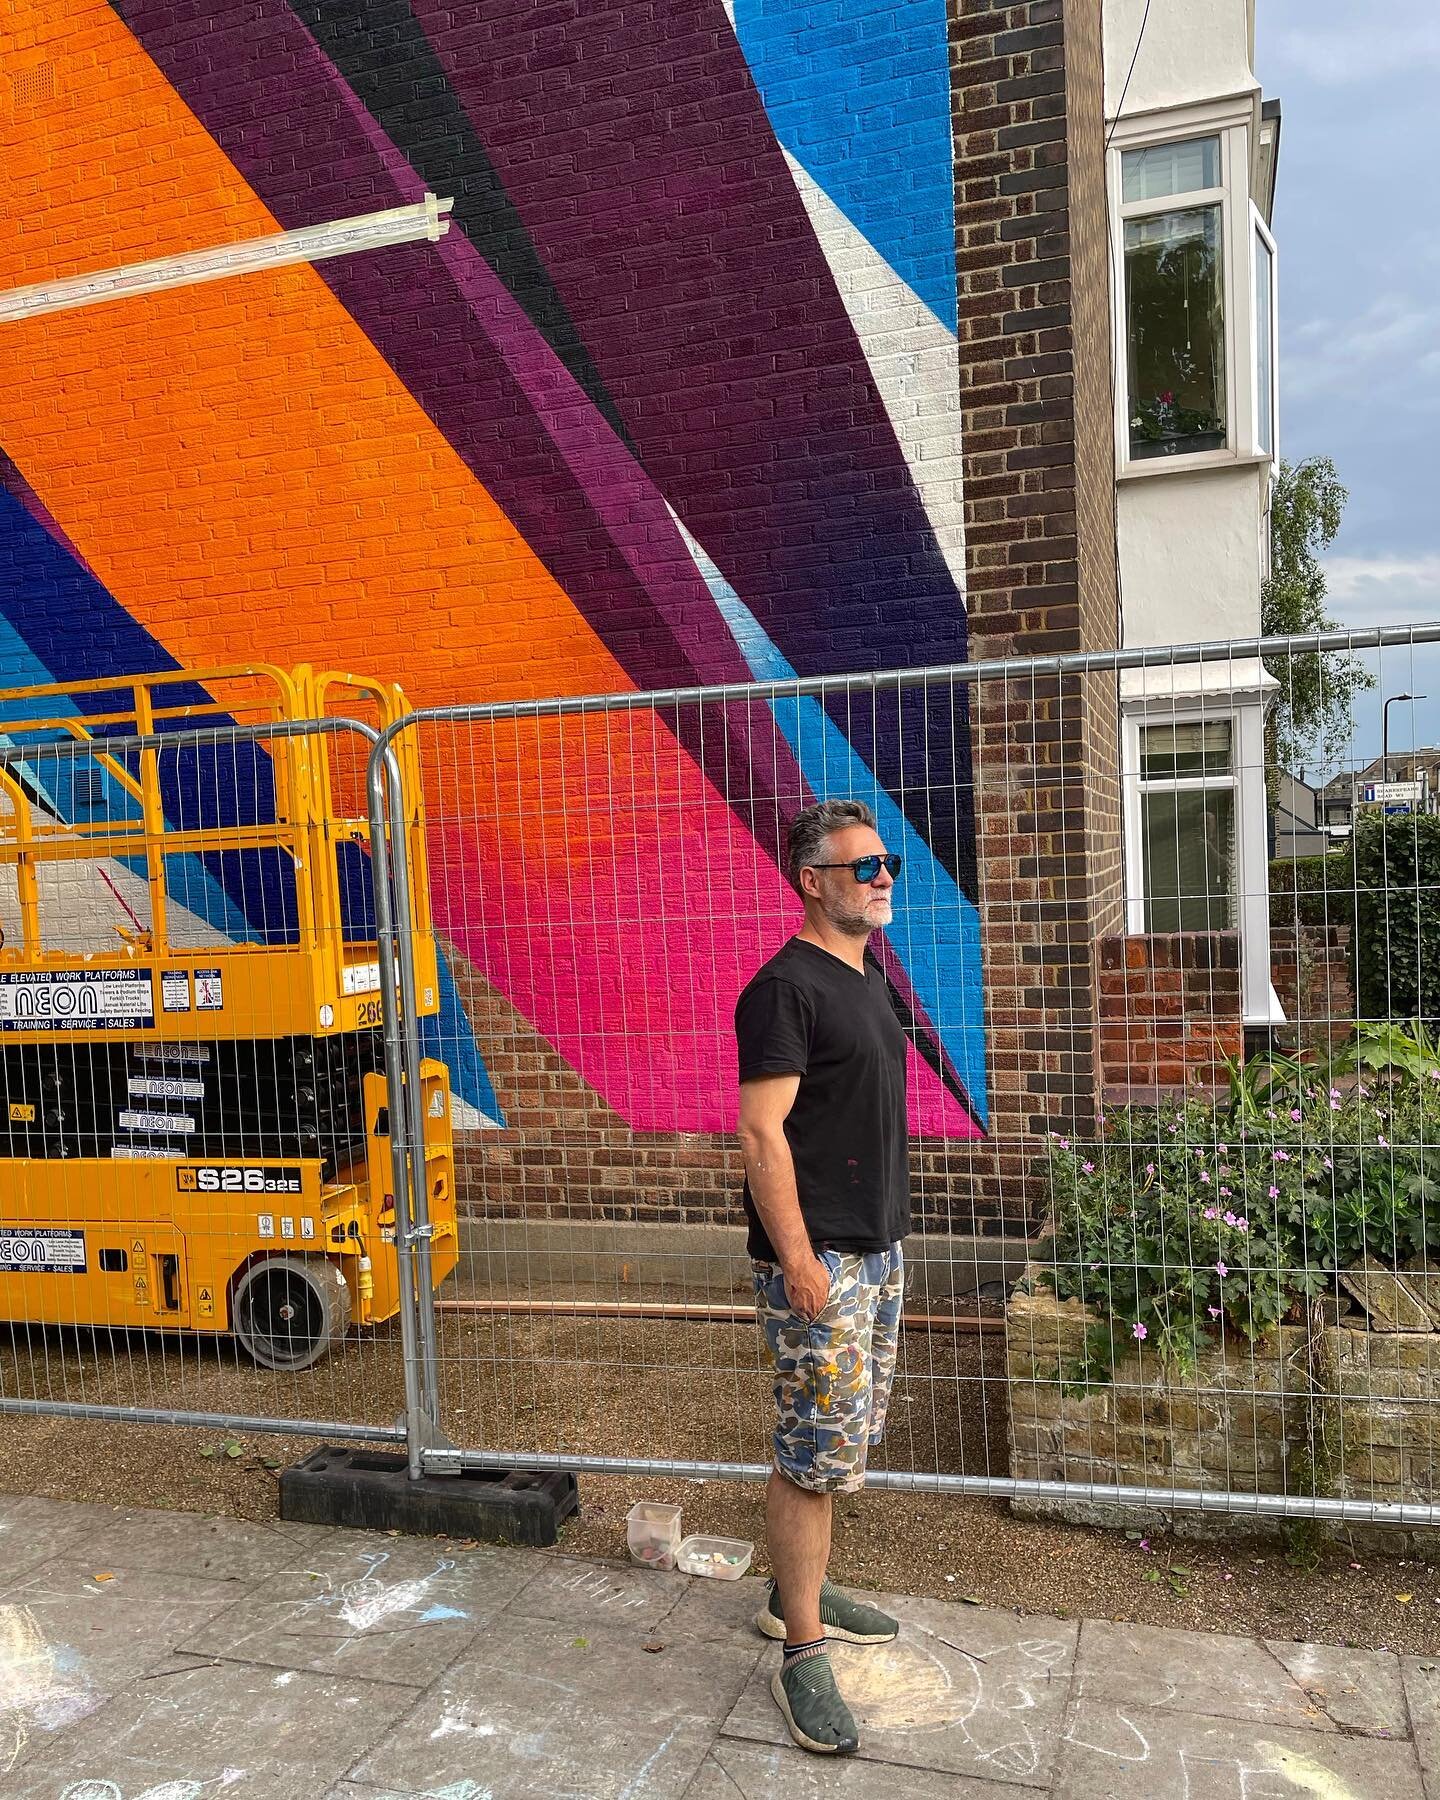 Peckham&rsquo;s best, @remirough is just about done with his mural for @actonunframed and we adore it already ❤️ we had countless thumbs ups for this piece coming together over the last few days. Scroll through to see some images from day 3 of painti